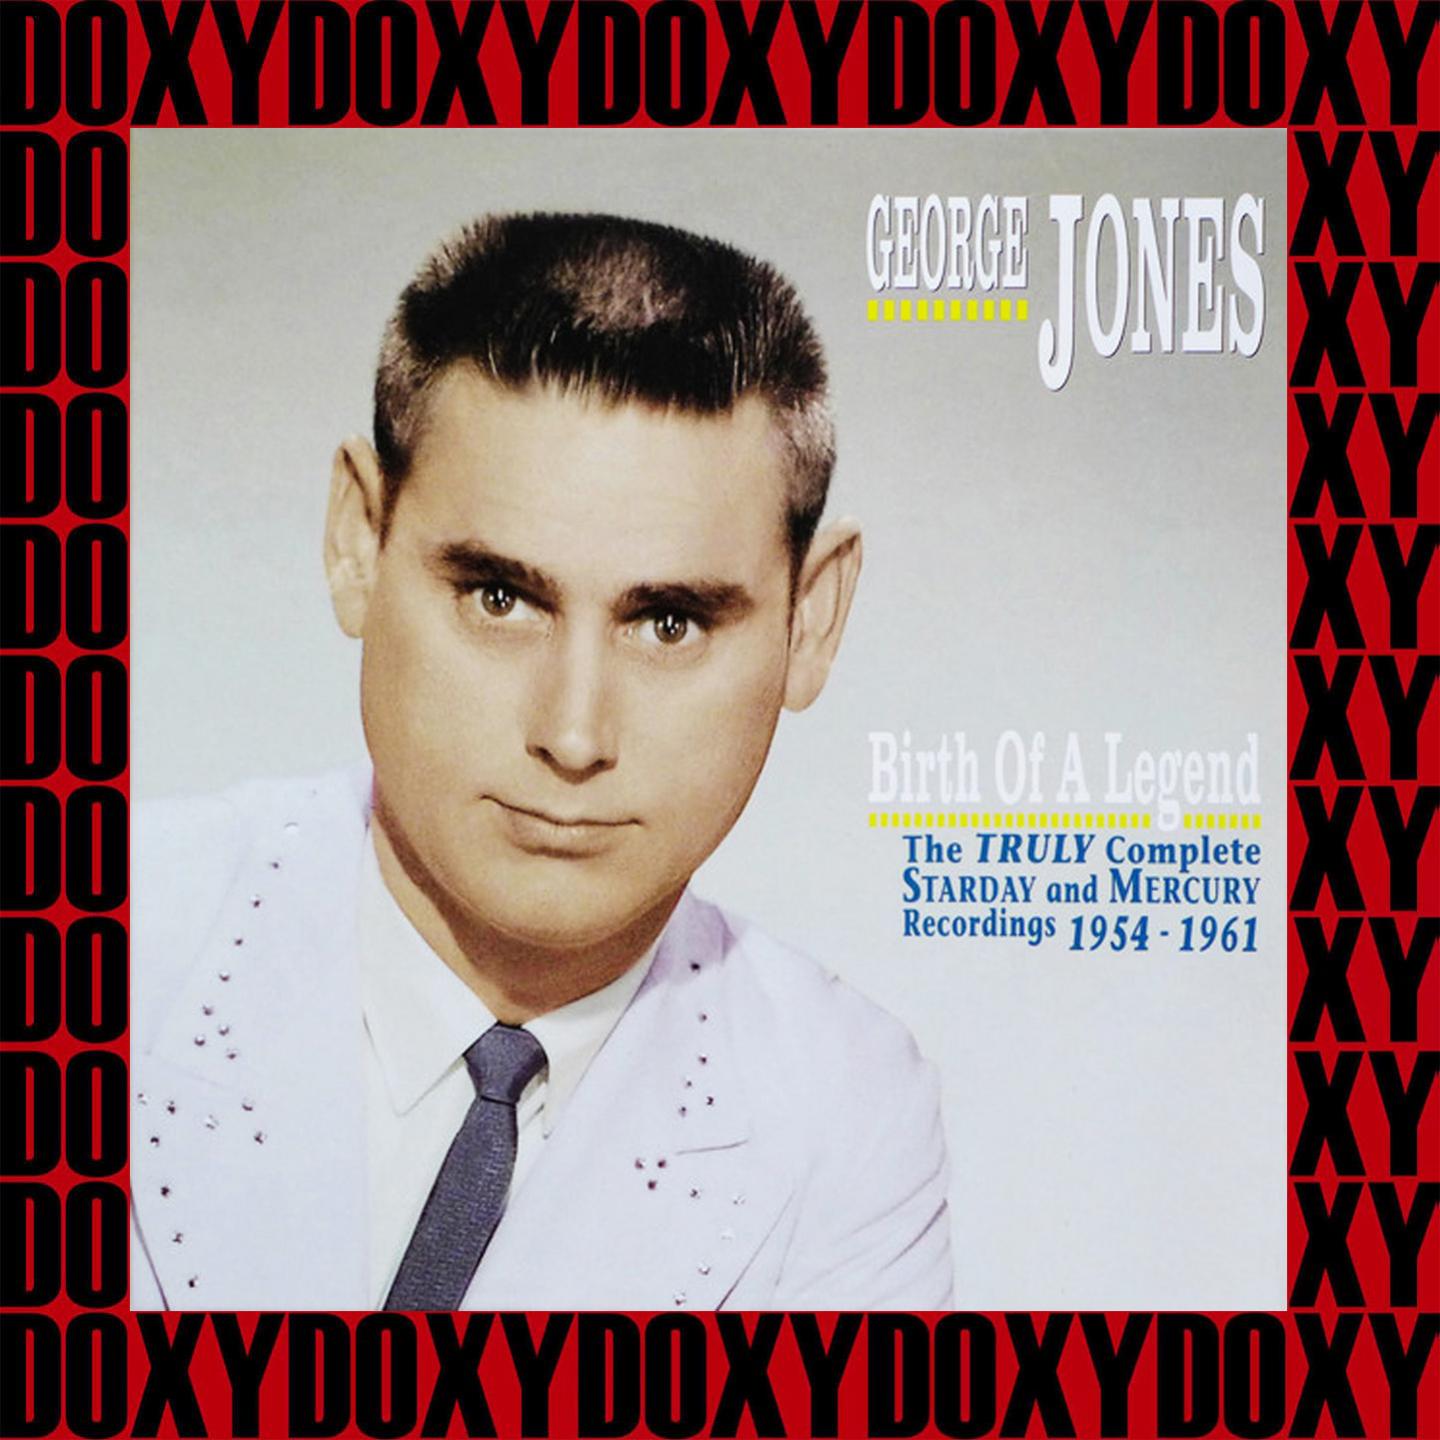 Birth Of A Legend,1954-1961 Vol. 1 (Remastered Version) (Doxy Collection)